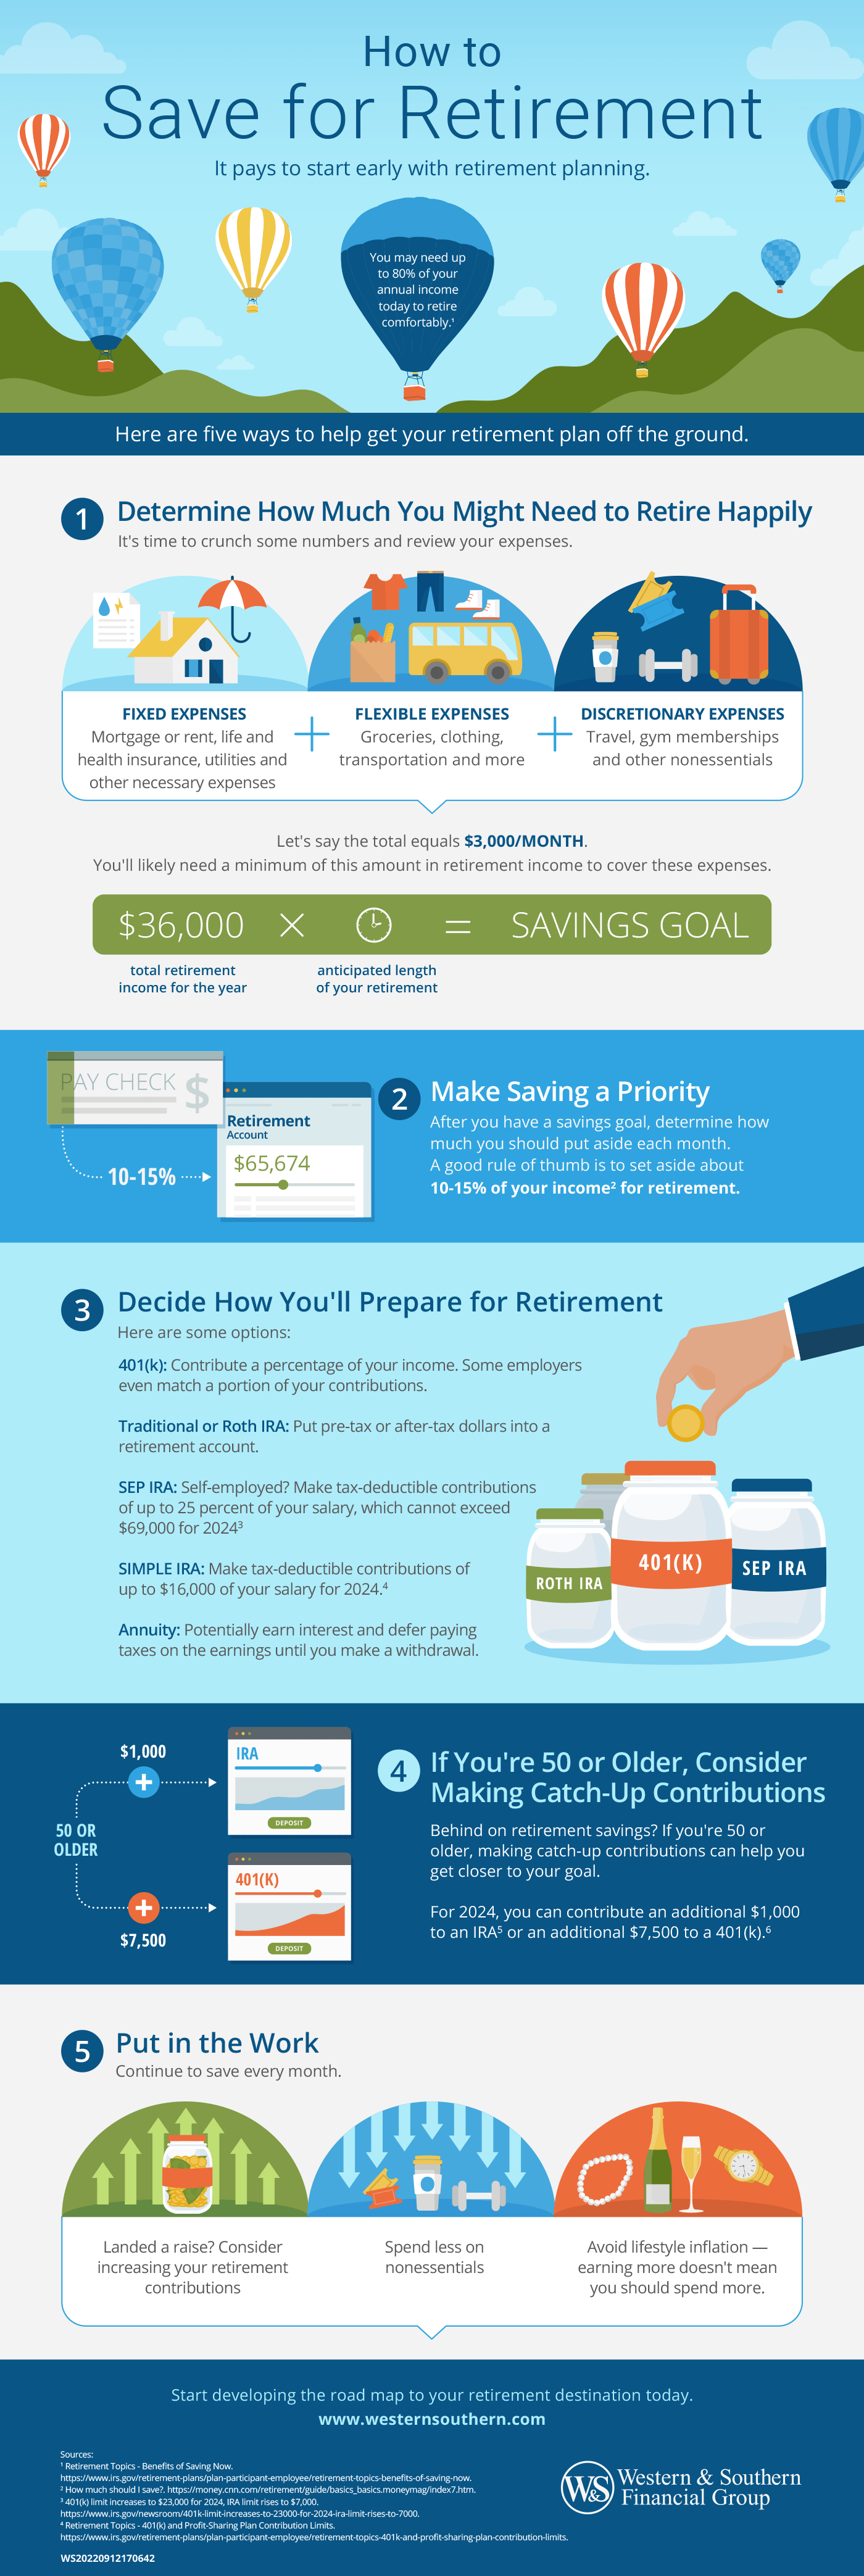 An infographic describing ways to help get your retirement plan off the ground.